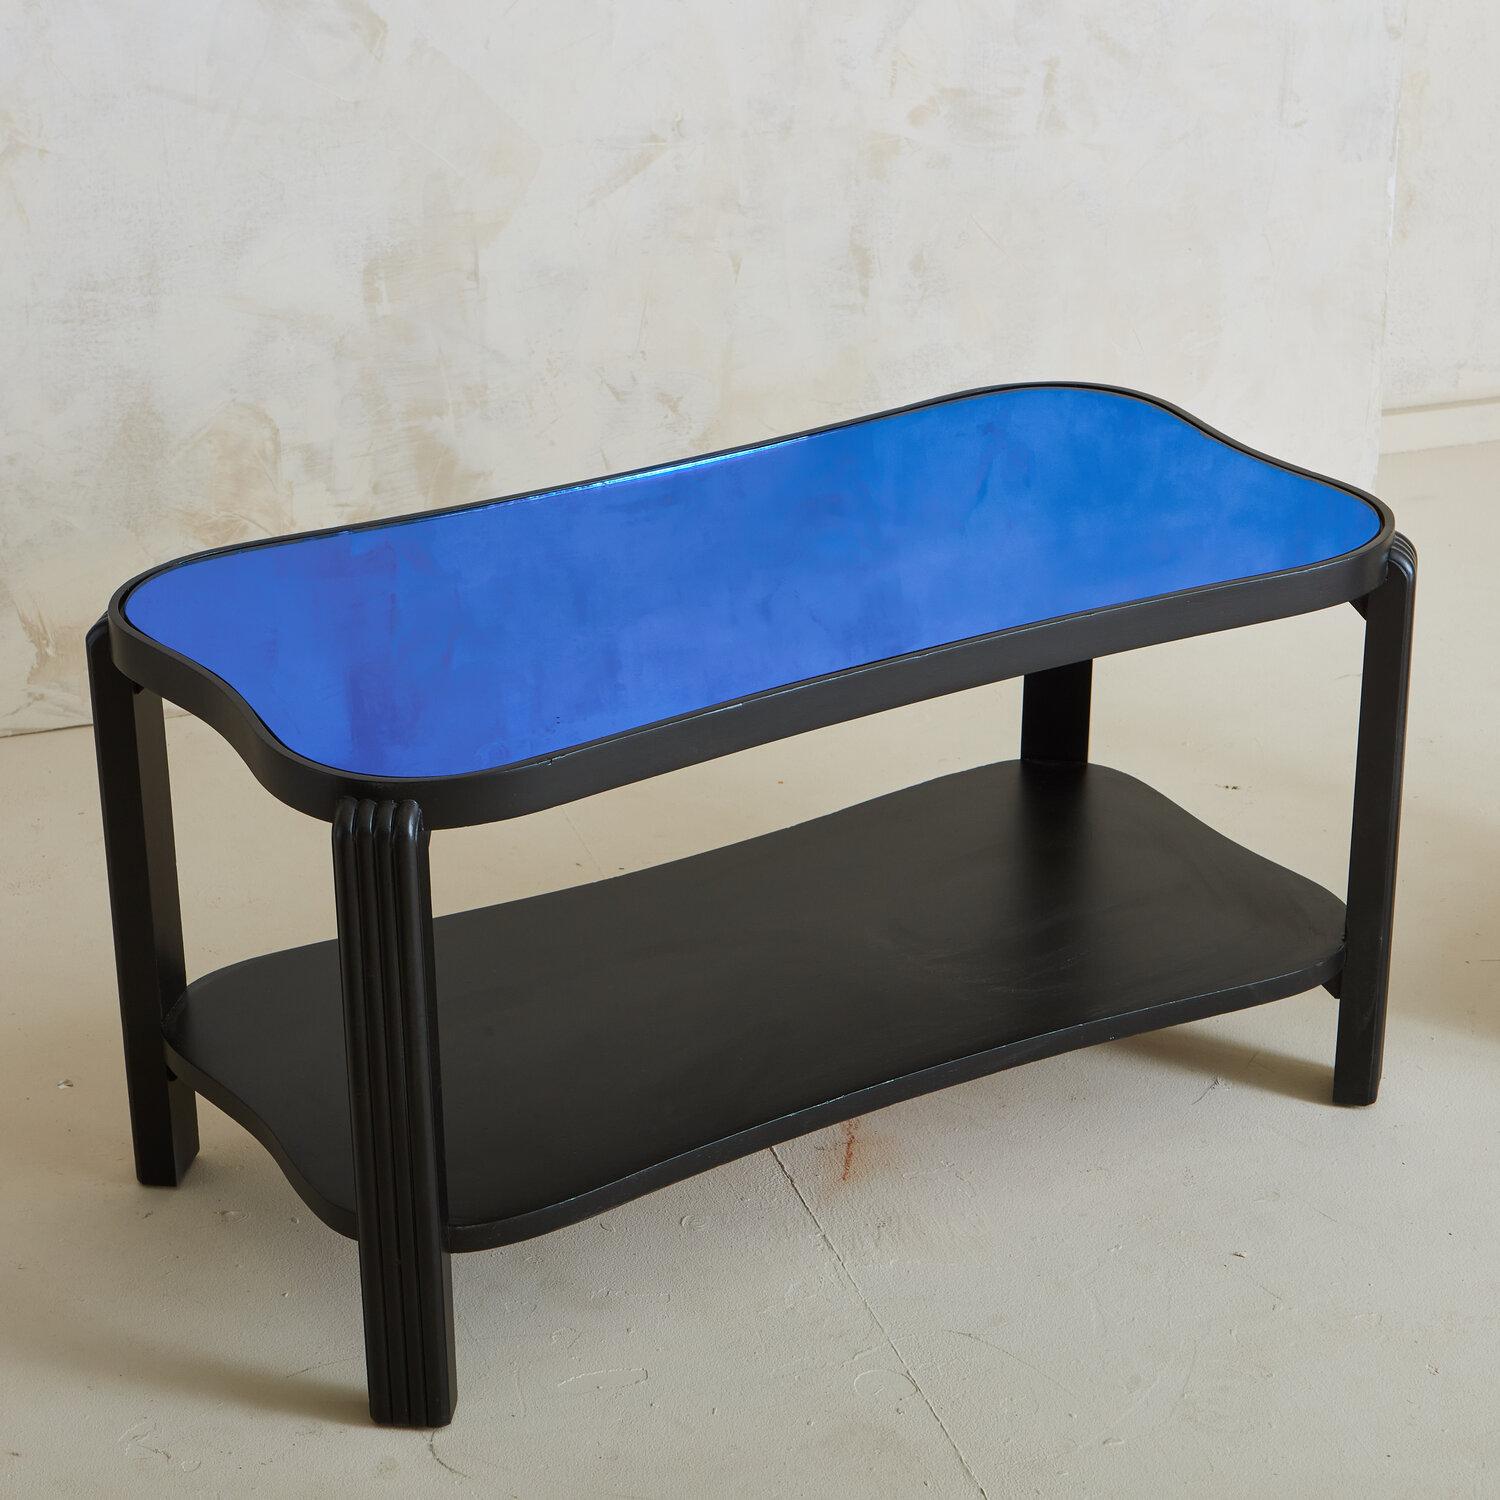 A black painted wood coffee table with rounded edges and fluted legs. This table features a vibrant blue reflective glass tabletop and two-tiers perfect for styling books and trinkets. It has one matching side table.